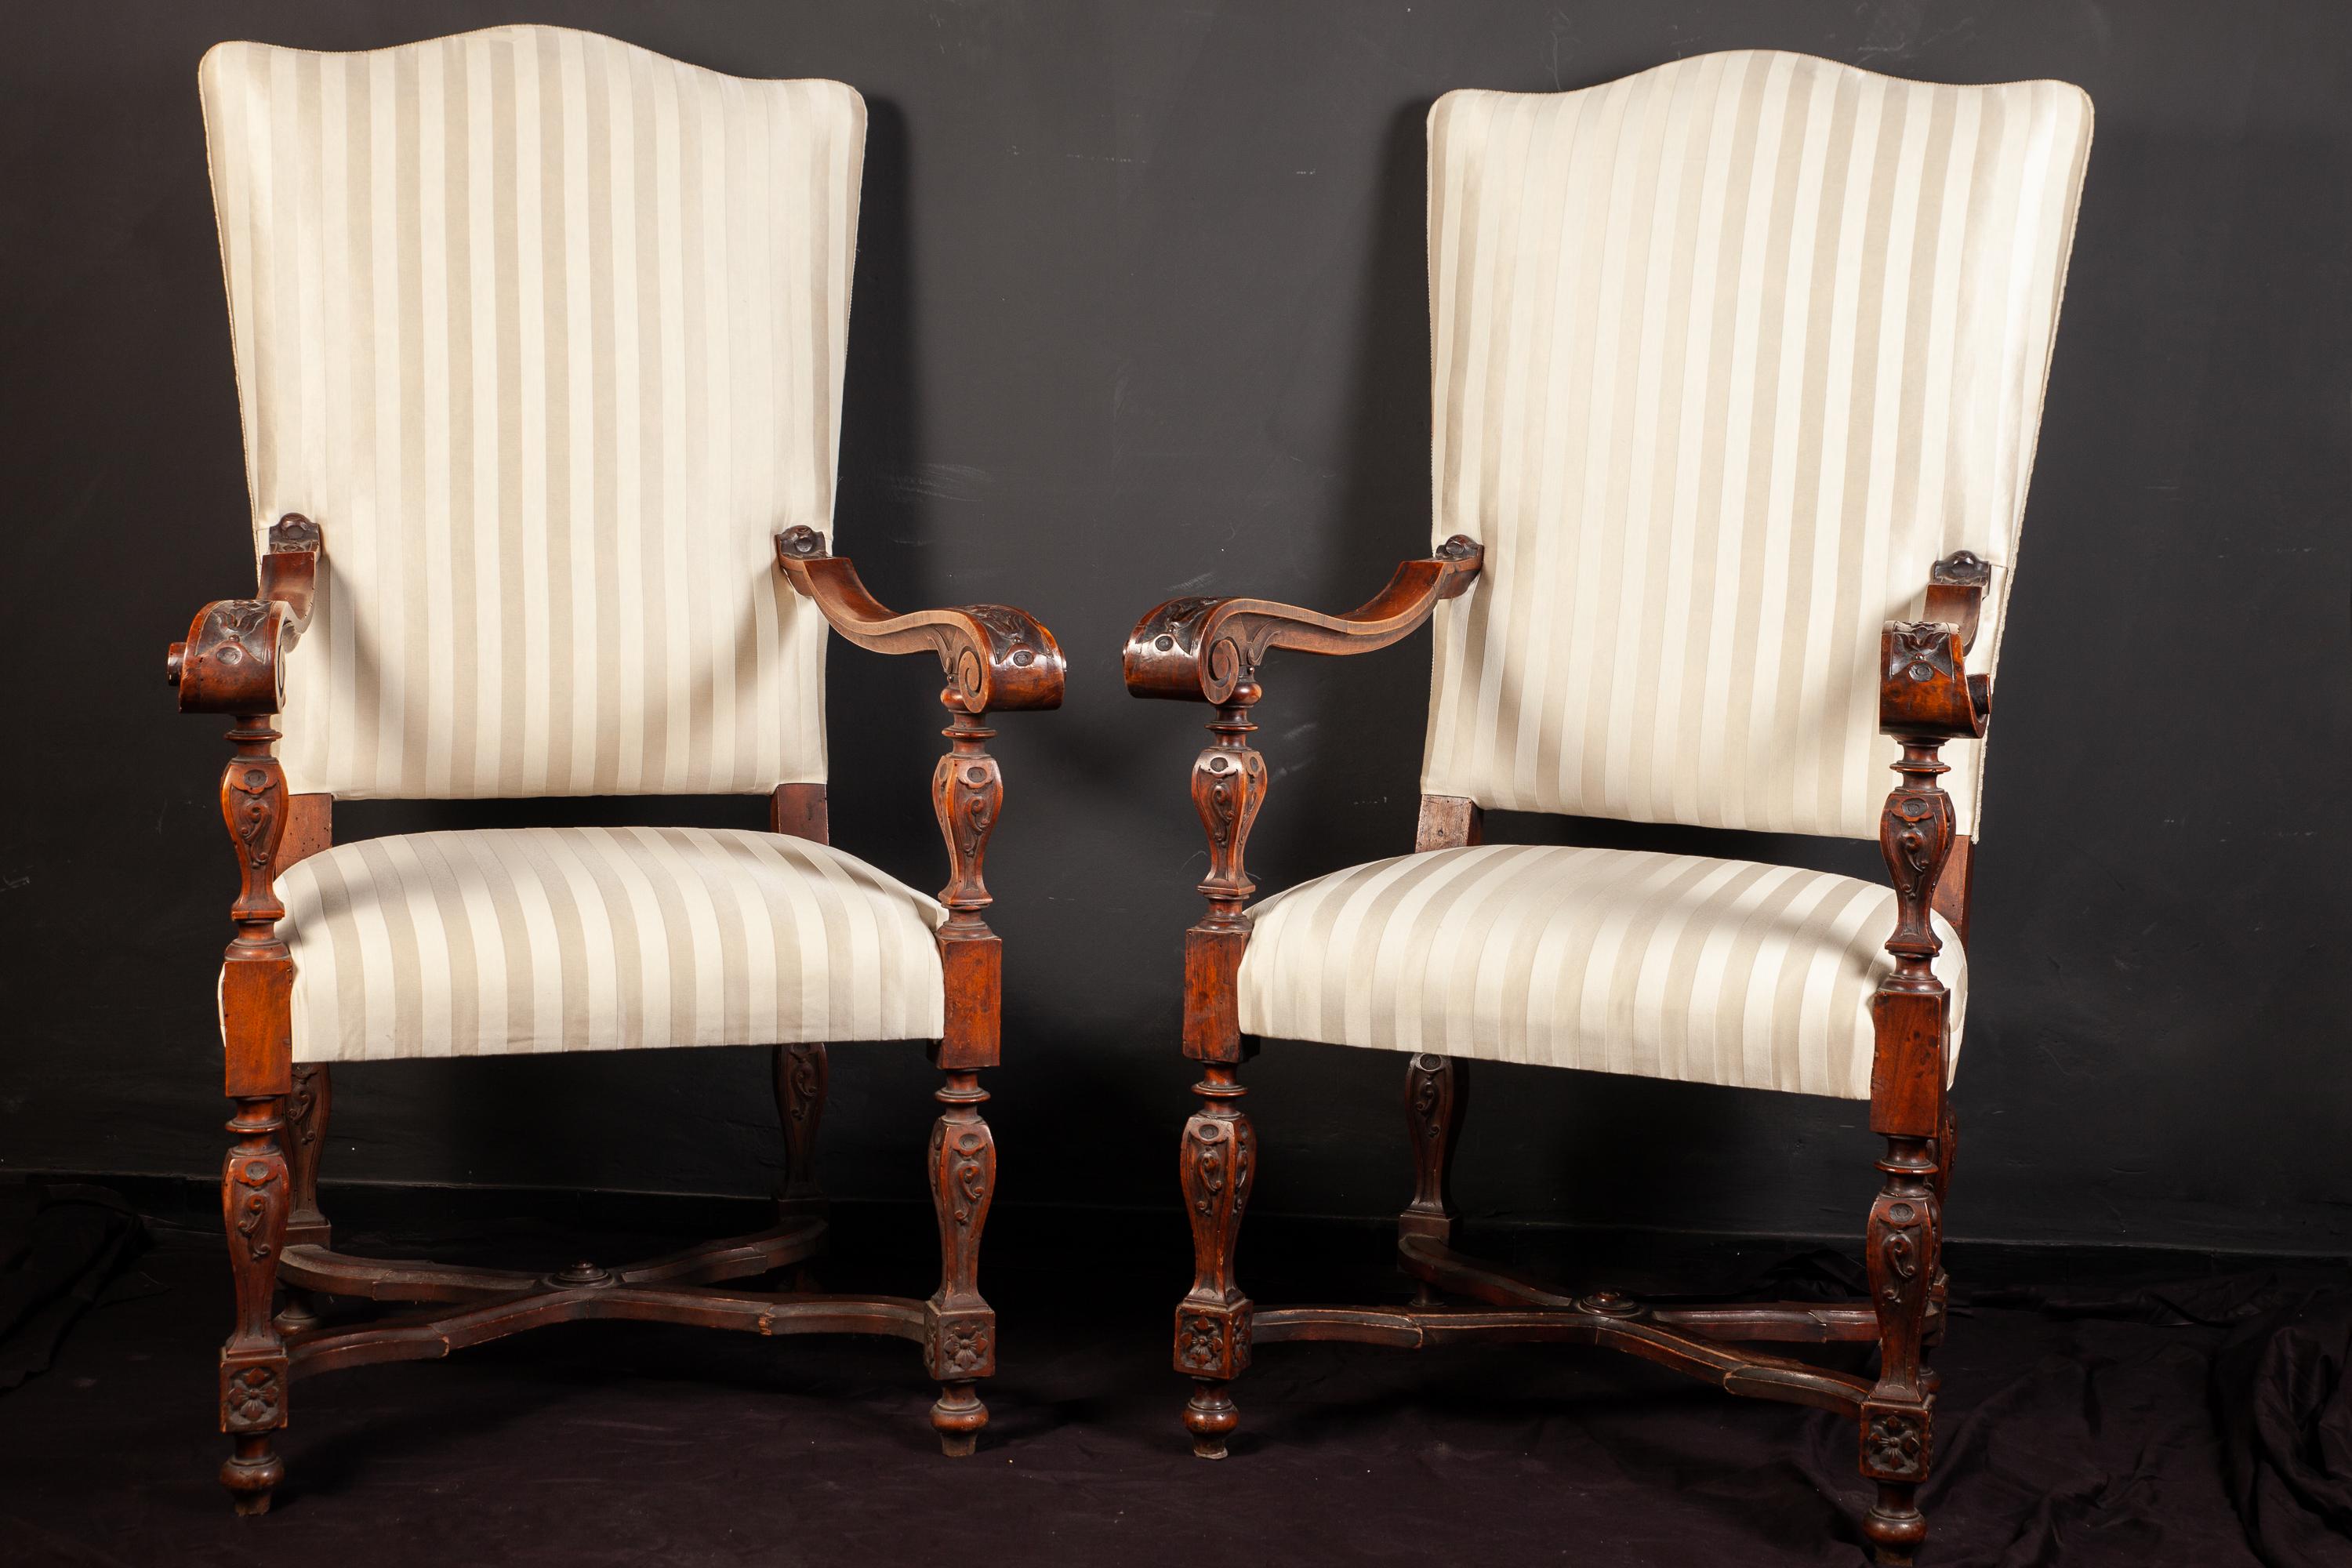 Pair of elegant Italian 19th century walnut finely carved armchairs with a white striped upholstery.
Measures: 130 x 60 x 50.